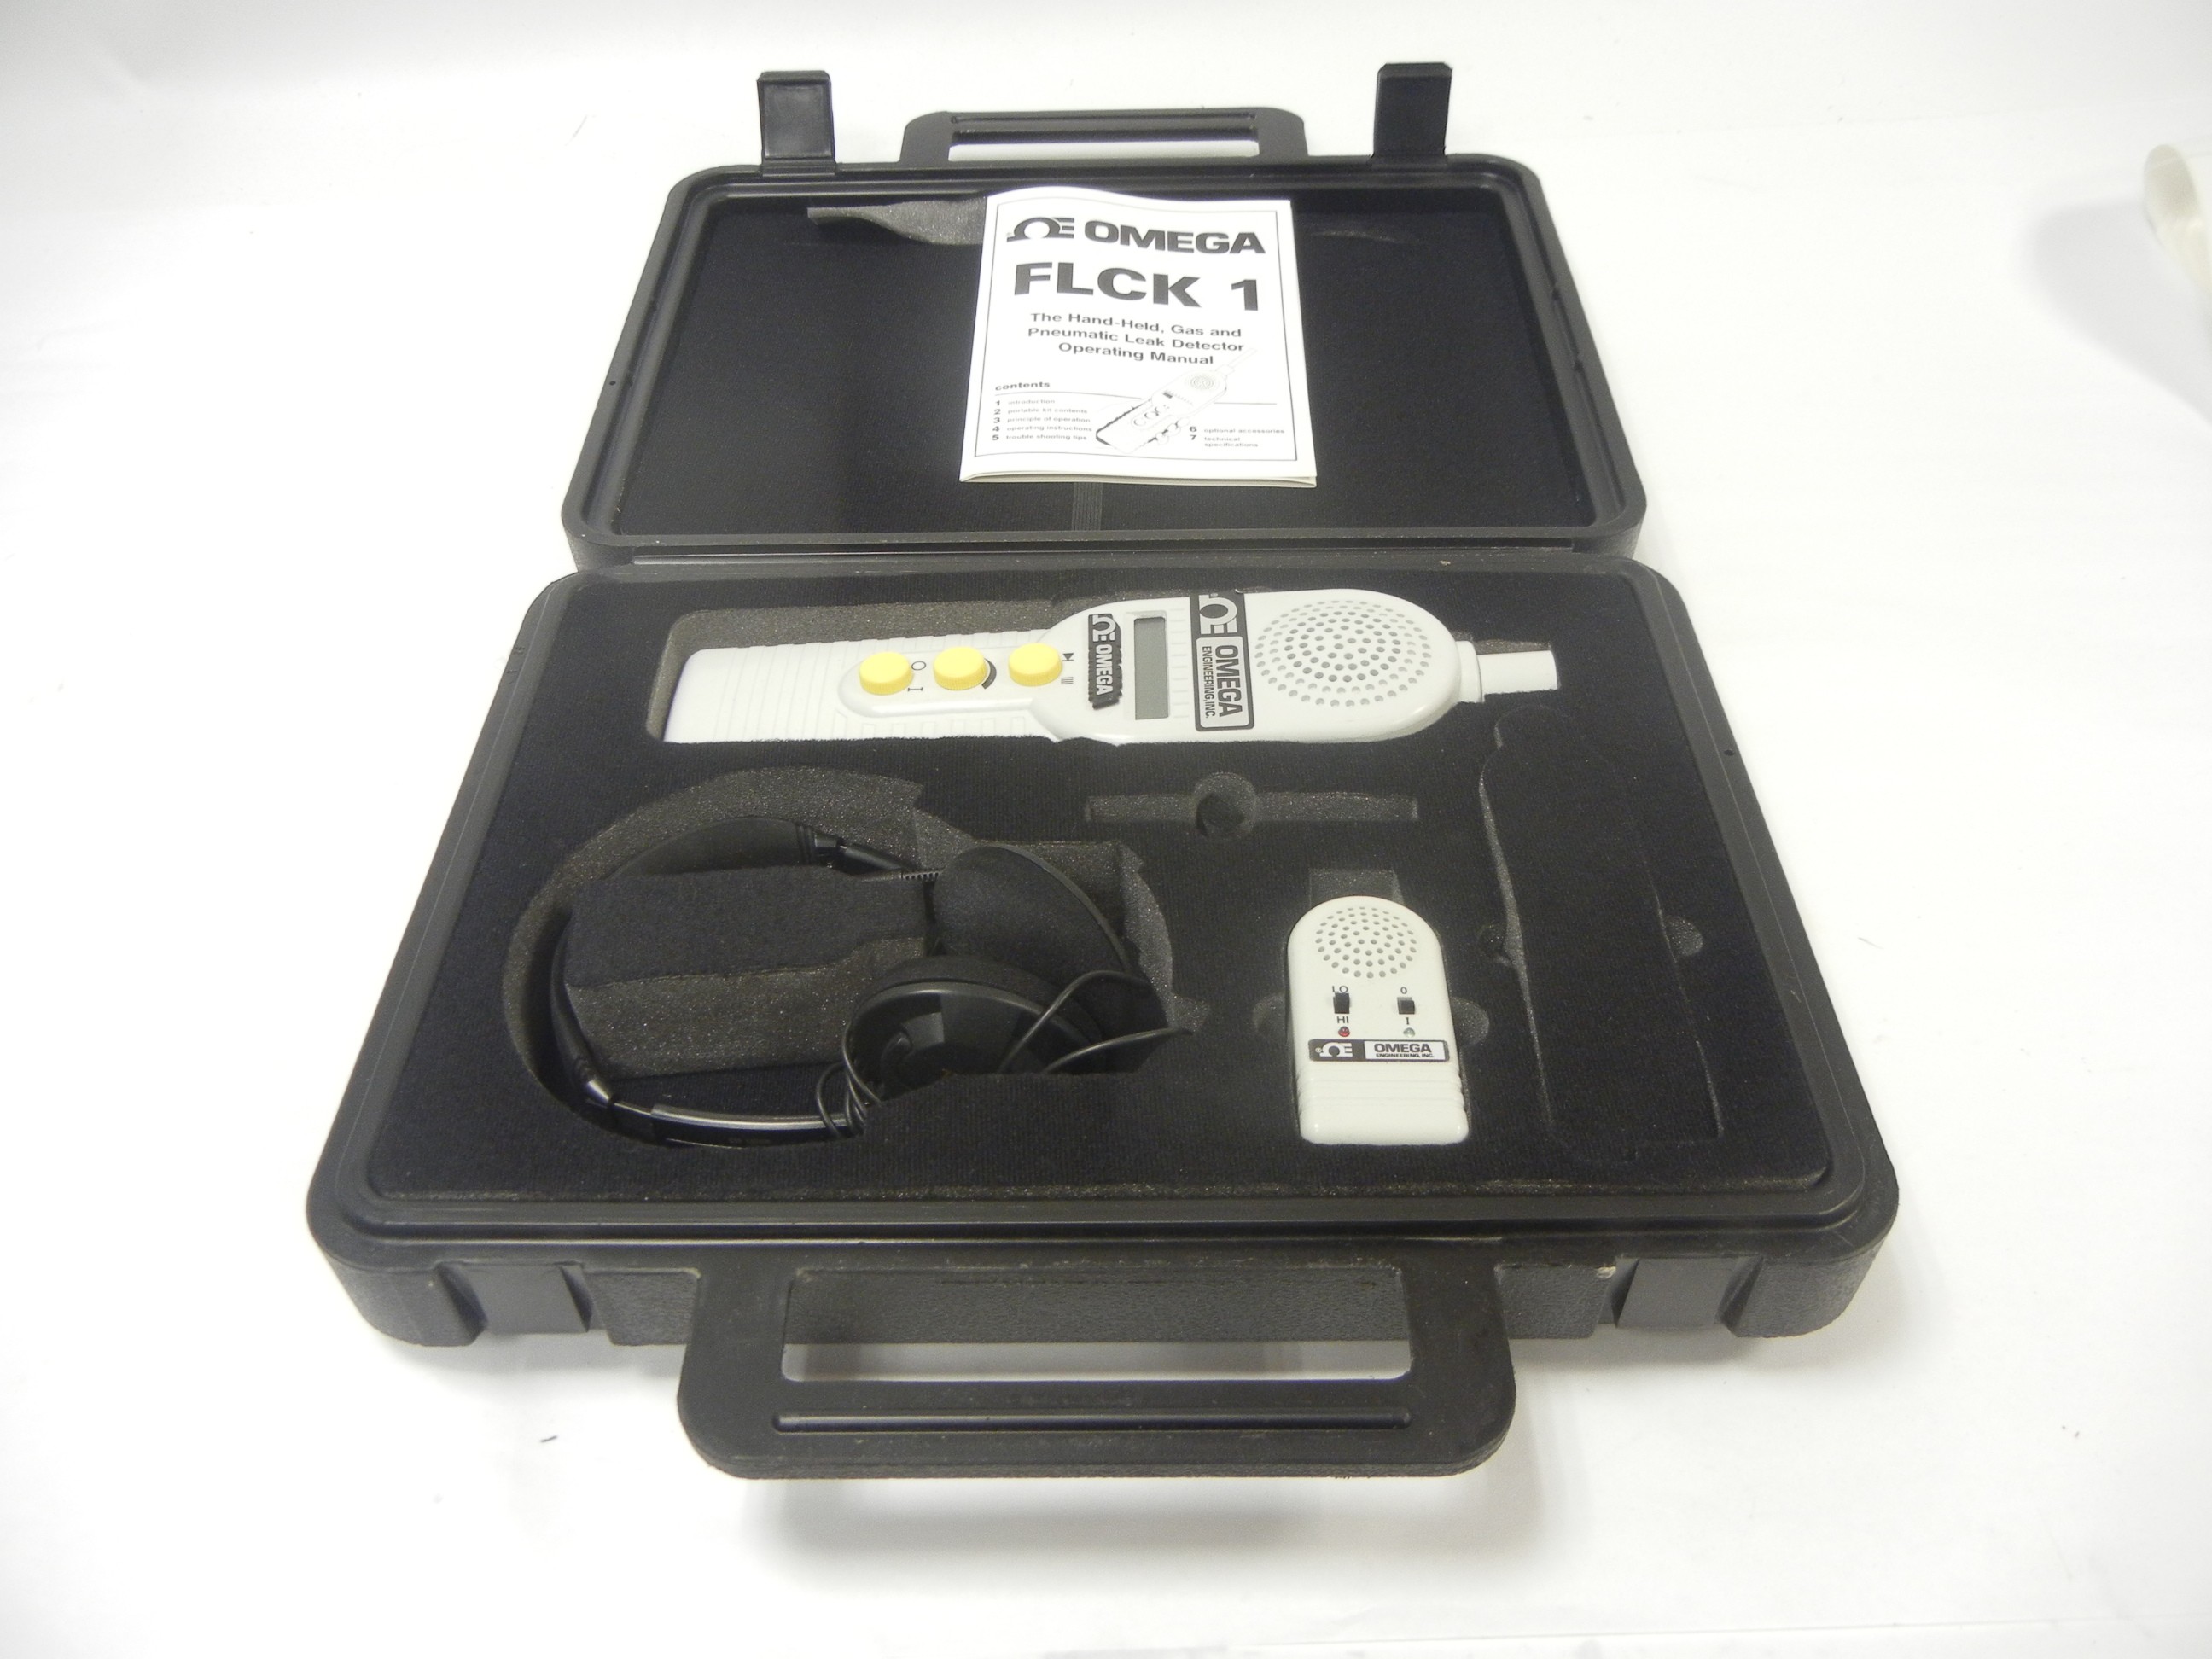 Omega FLCK 1 Hand Held Gas and Pneumatic Leak Detector Kit 